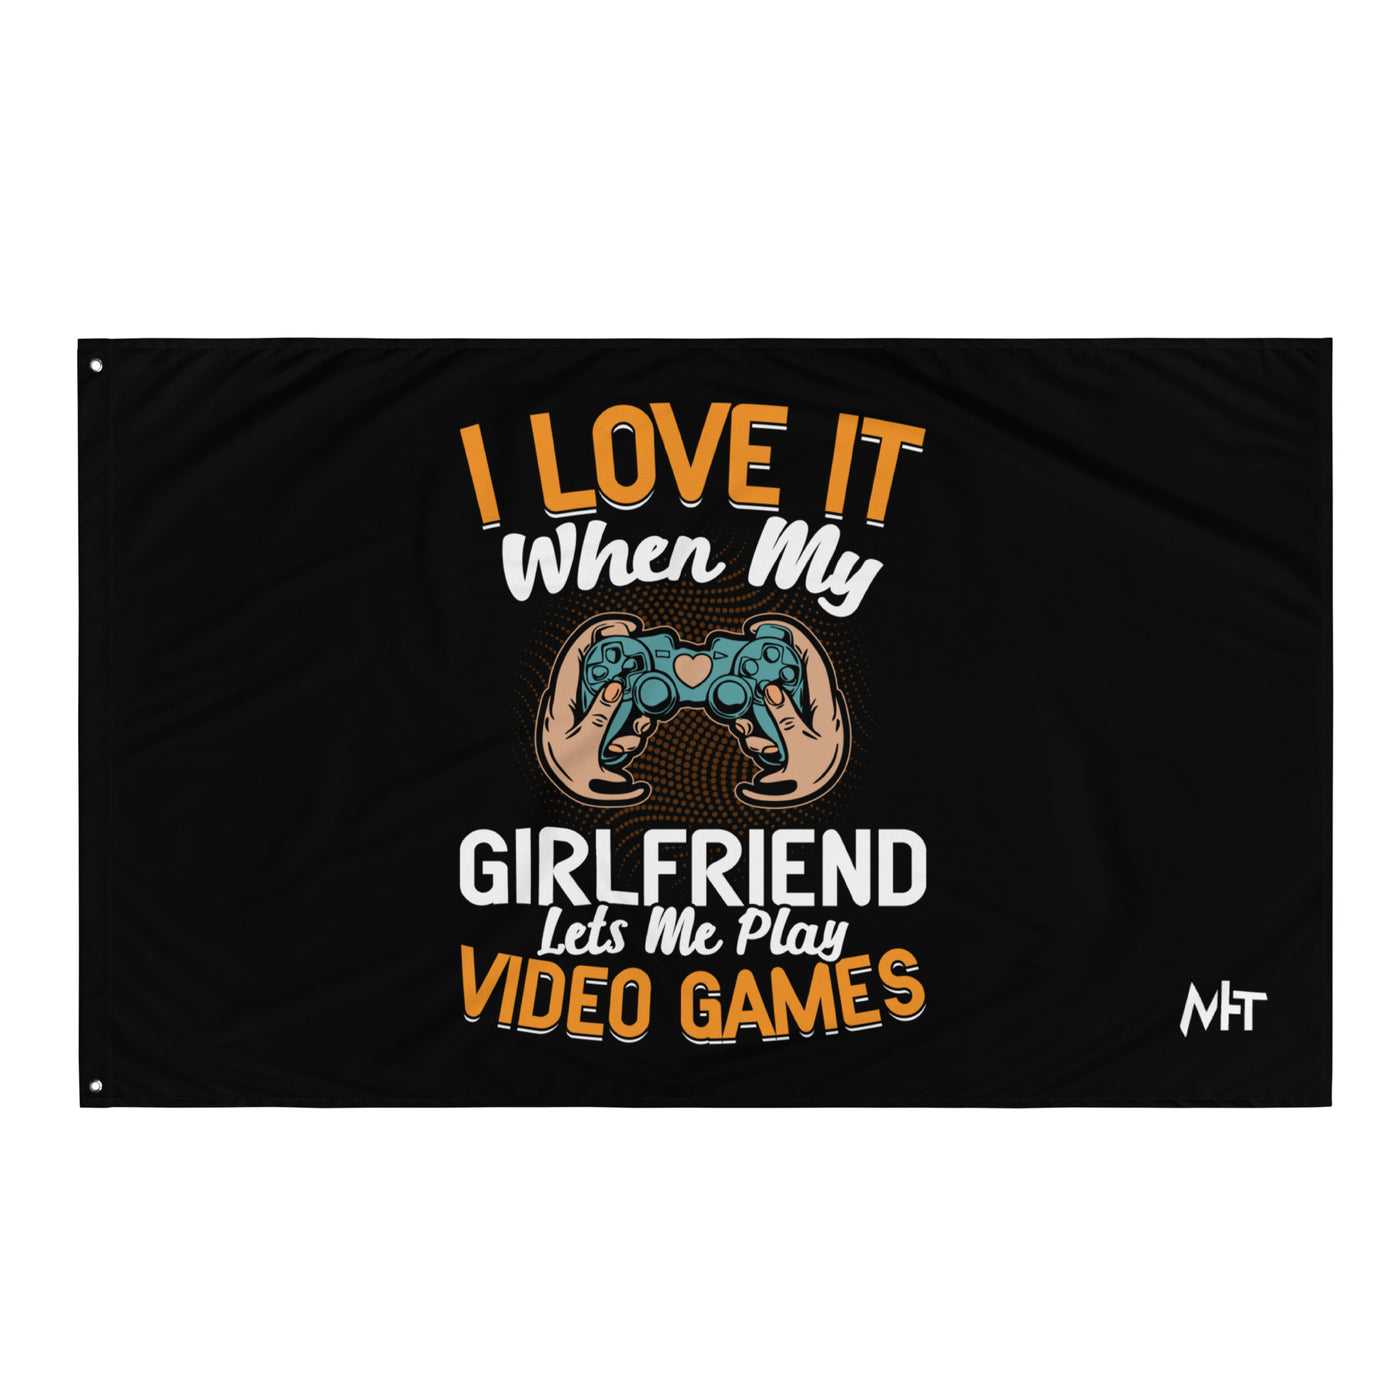 I love it when My Girlfriend Let me Play Videogames - Flag